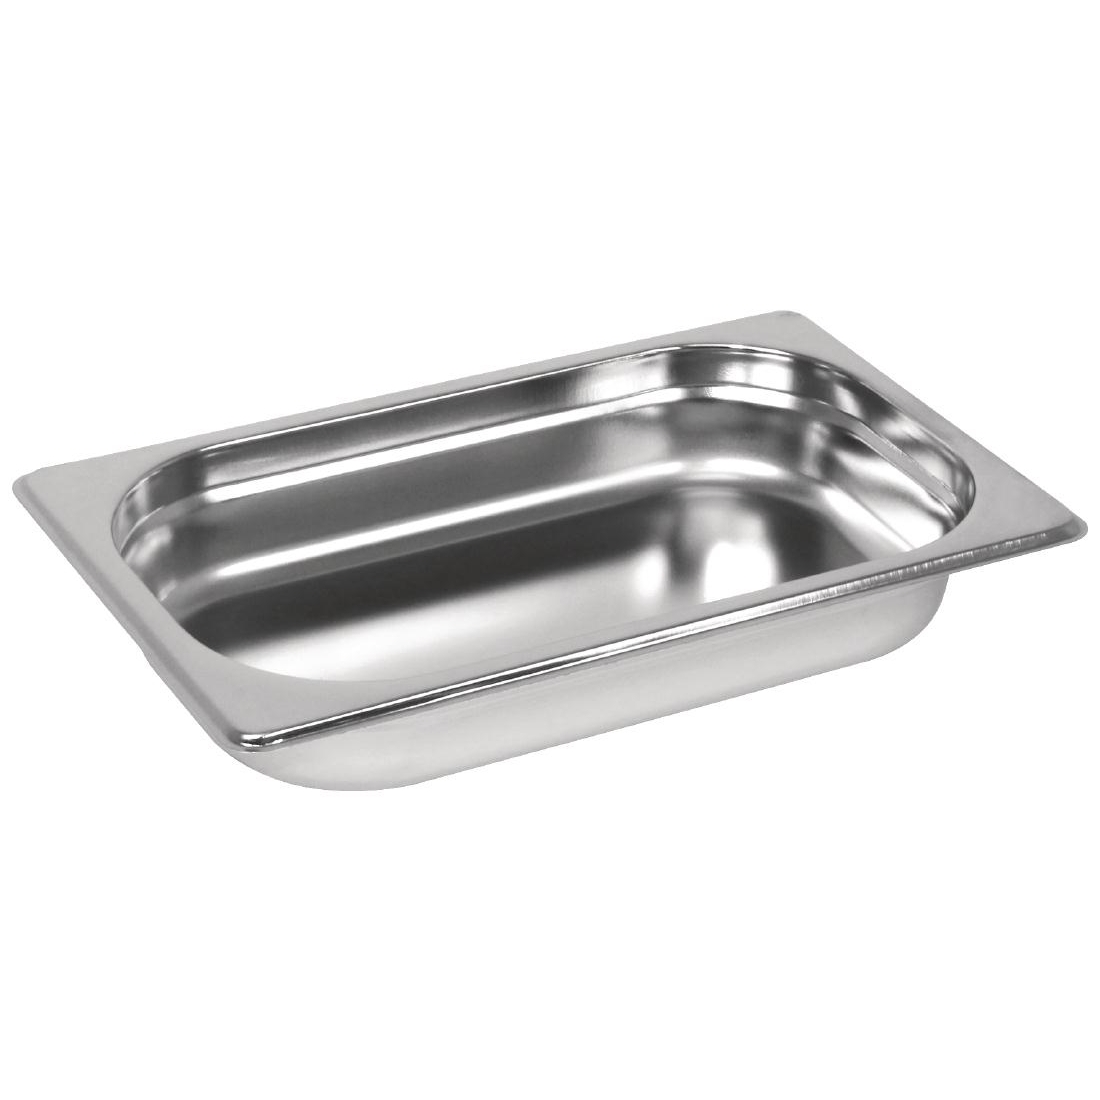 Vogue Stainless Steel GN 1/4 Pan 40mm